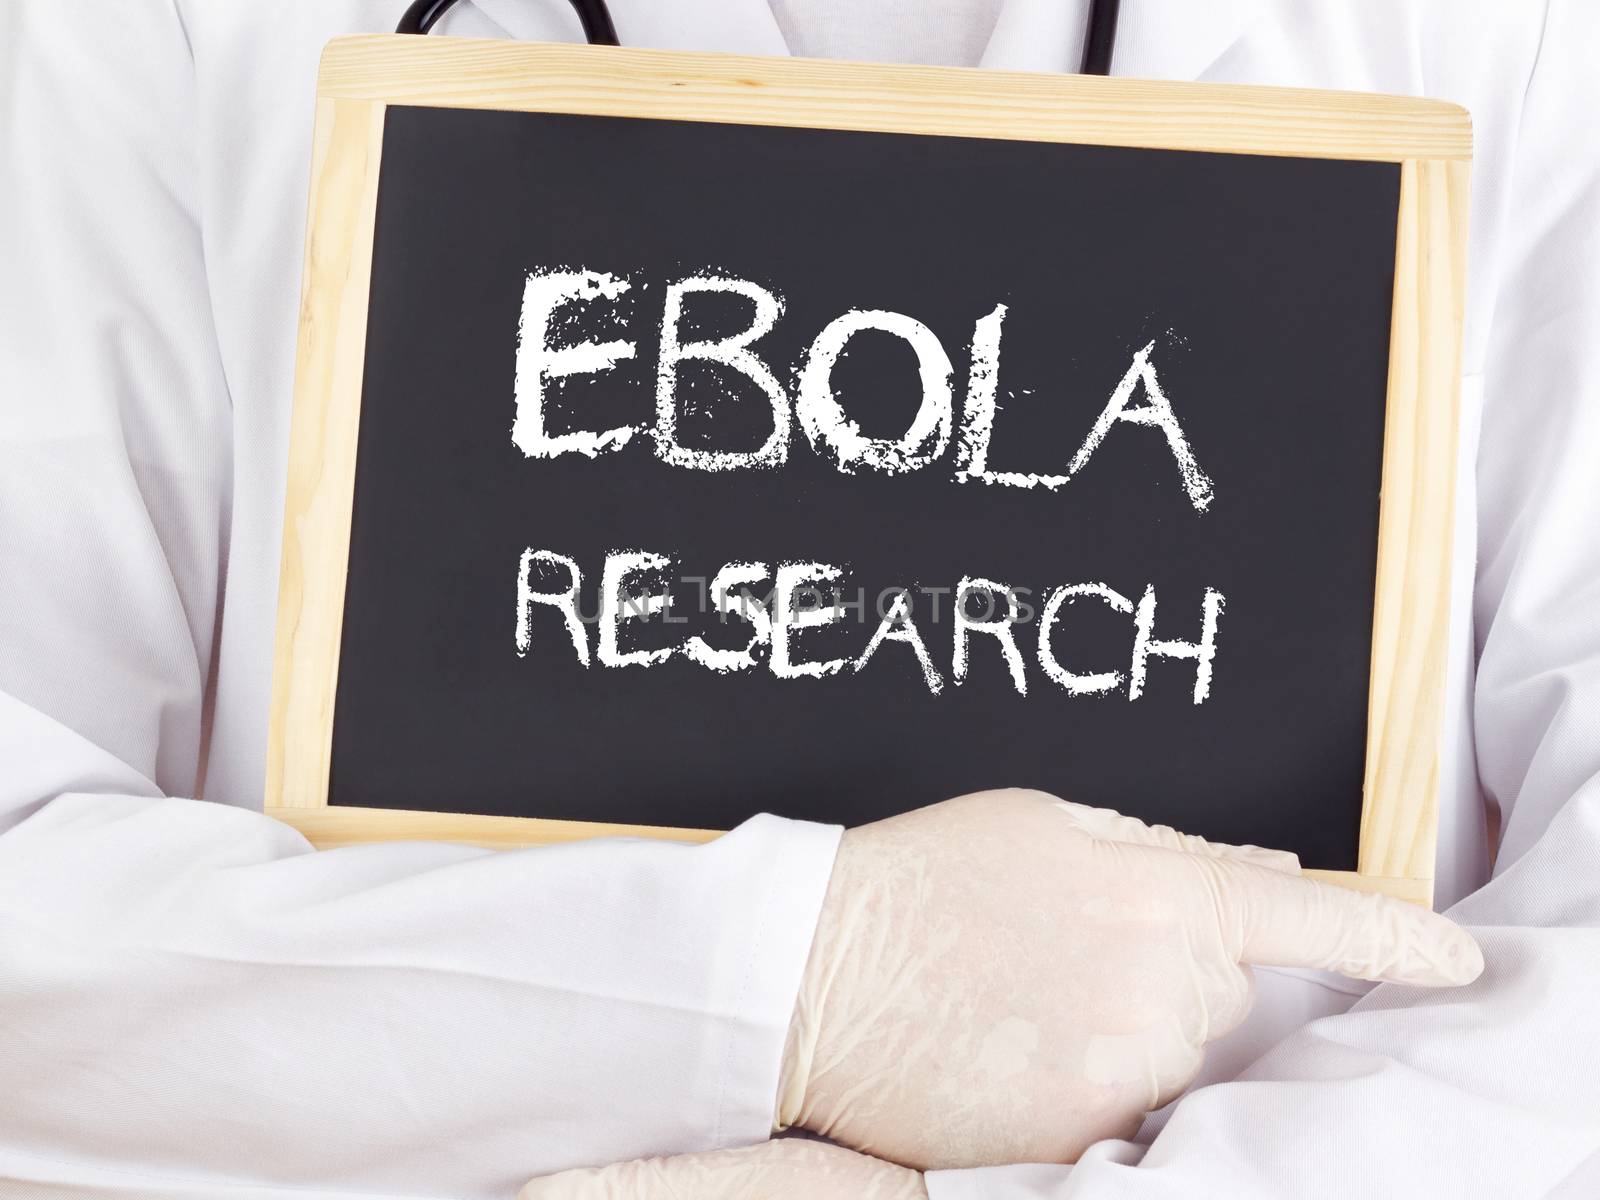 Doctor shows information: Ebola research